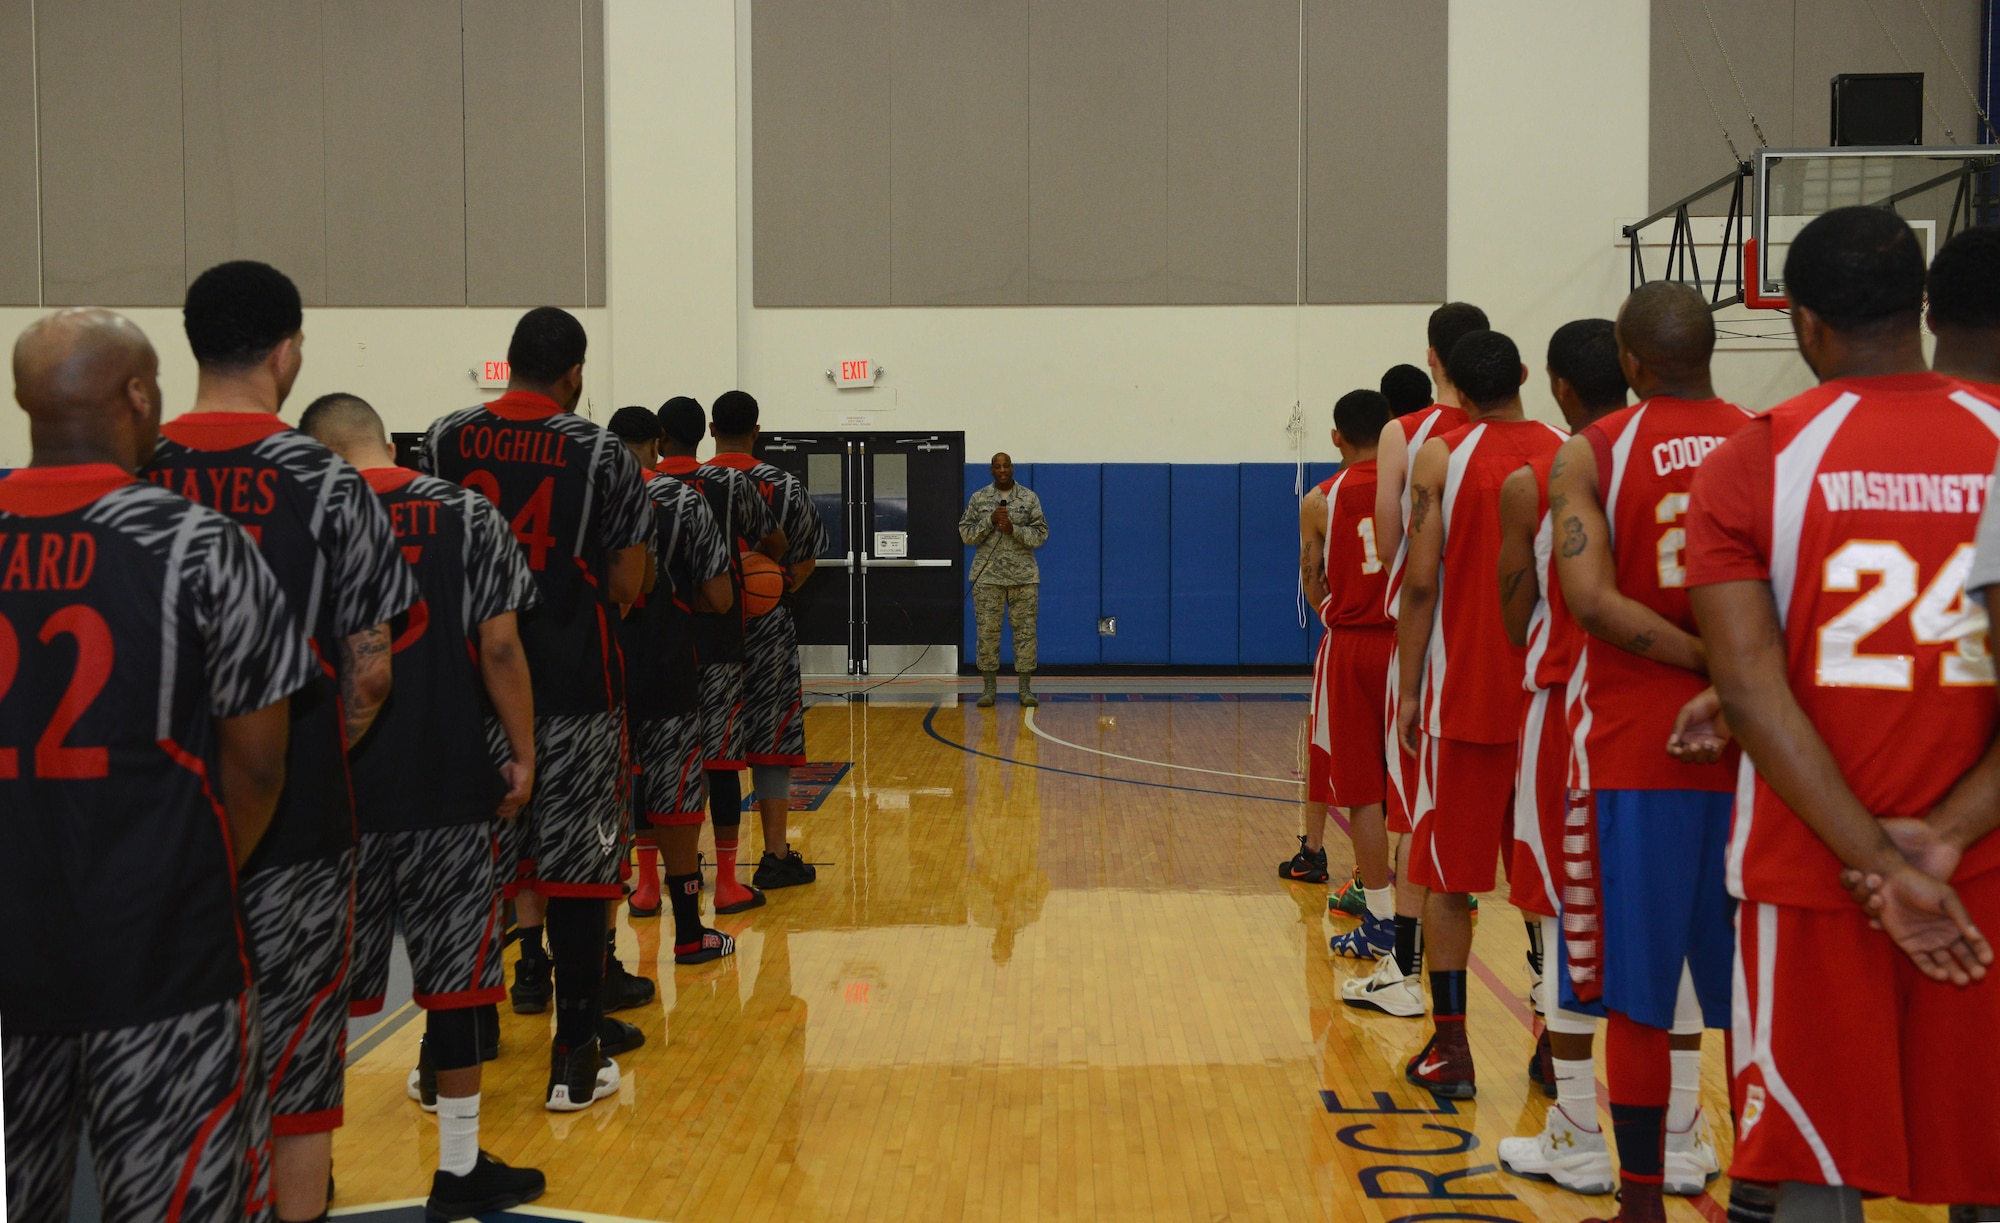 Basketball teams gather for the annual March Madness opening ceremony March 19, 2016, at Andersen Air Force Base, Guam. March Madness is a Pacific-wide basketball tournament which will be held March 19-27. (U.S. Air Force photo/Airman 1st Class Arielle Vasquez)